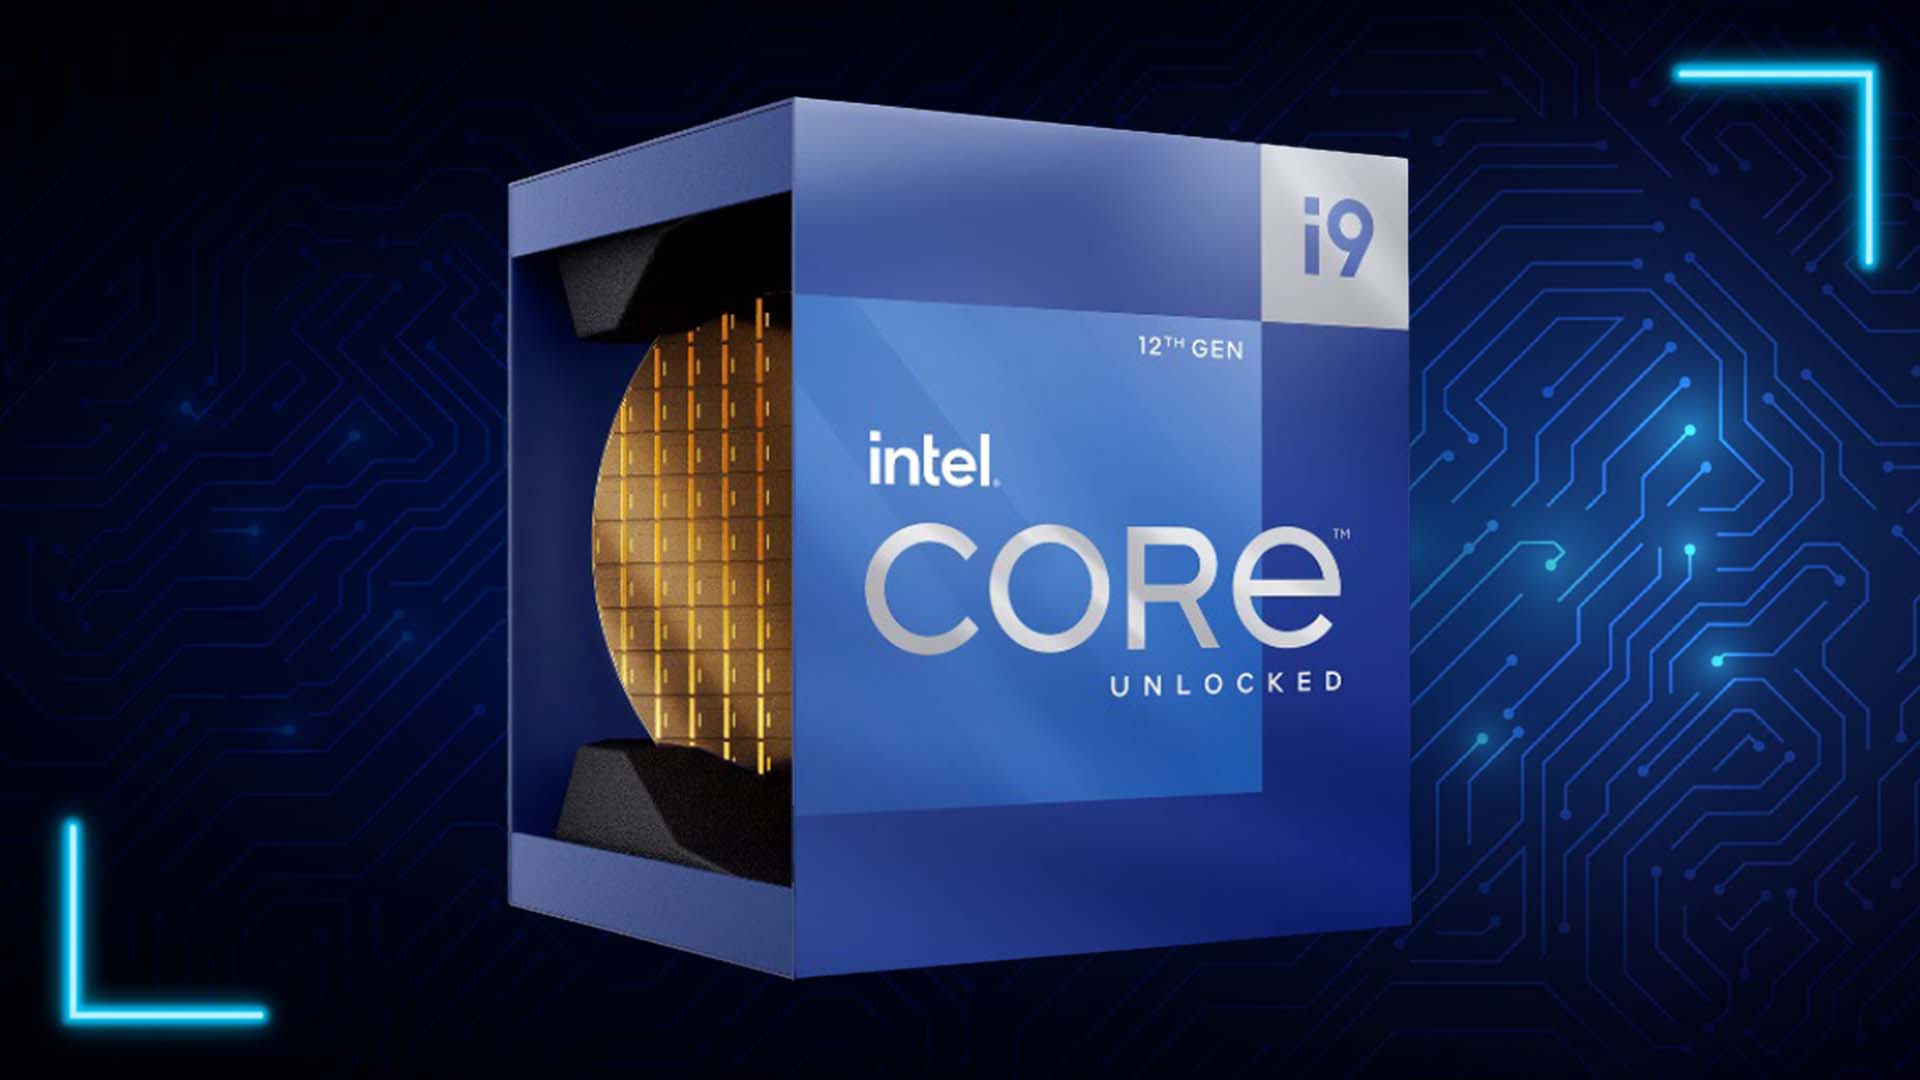  Intel claims the Core i9 12900K is the 'world's best gaming processor' but has to retest Ryzen 